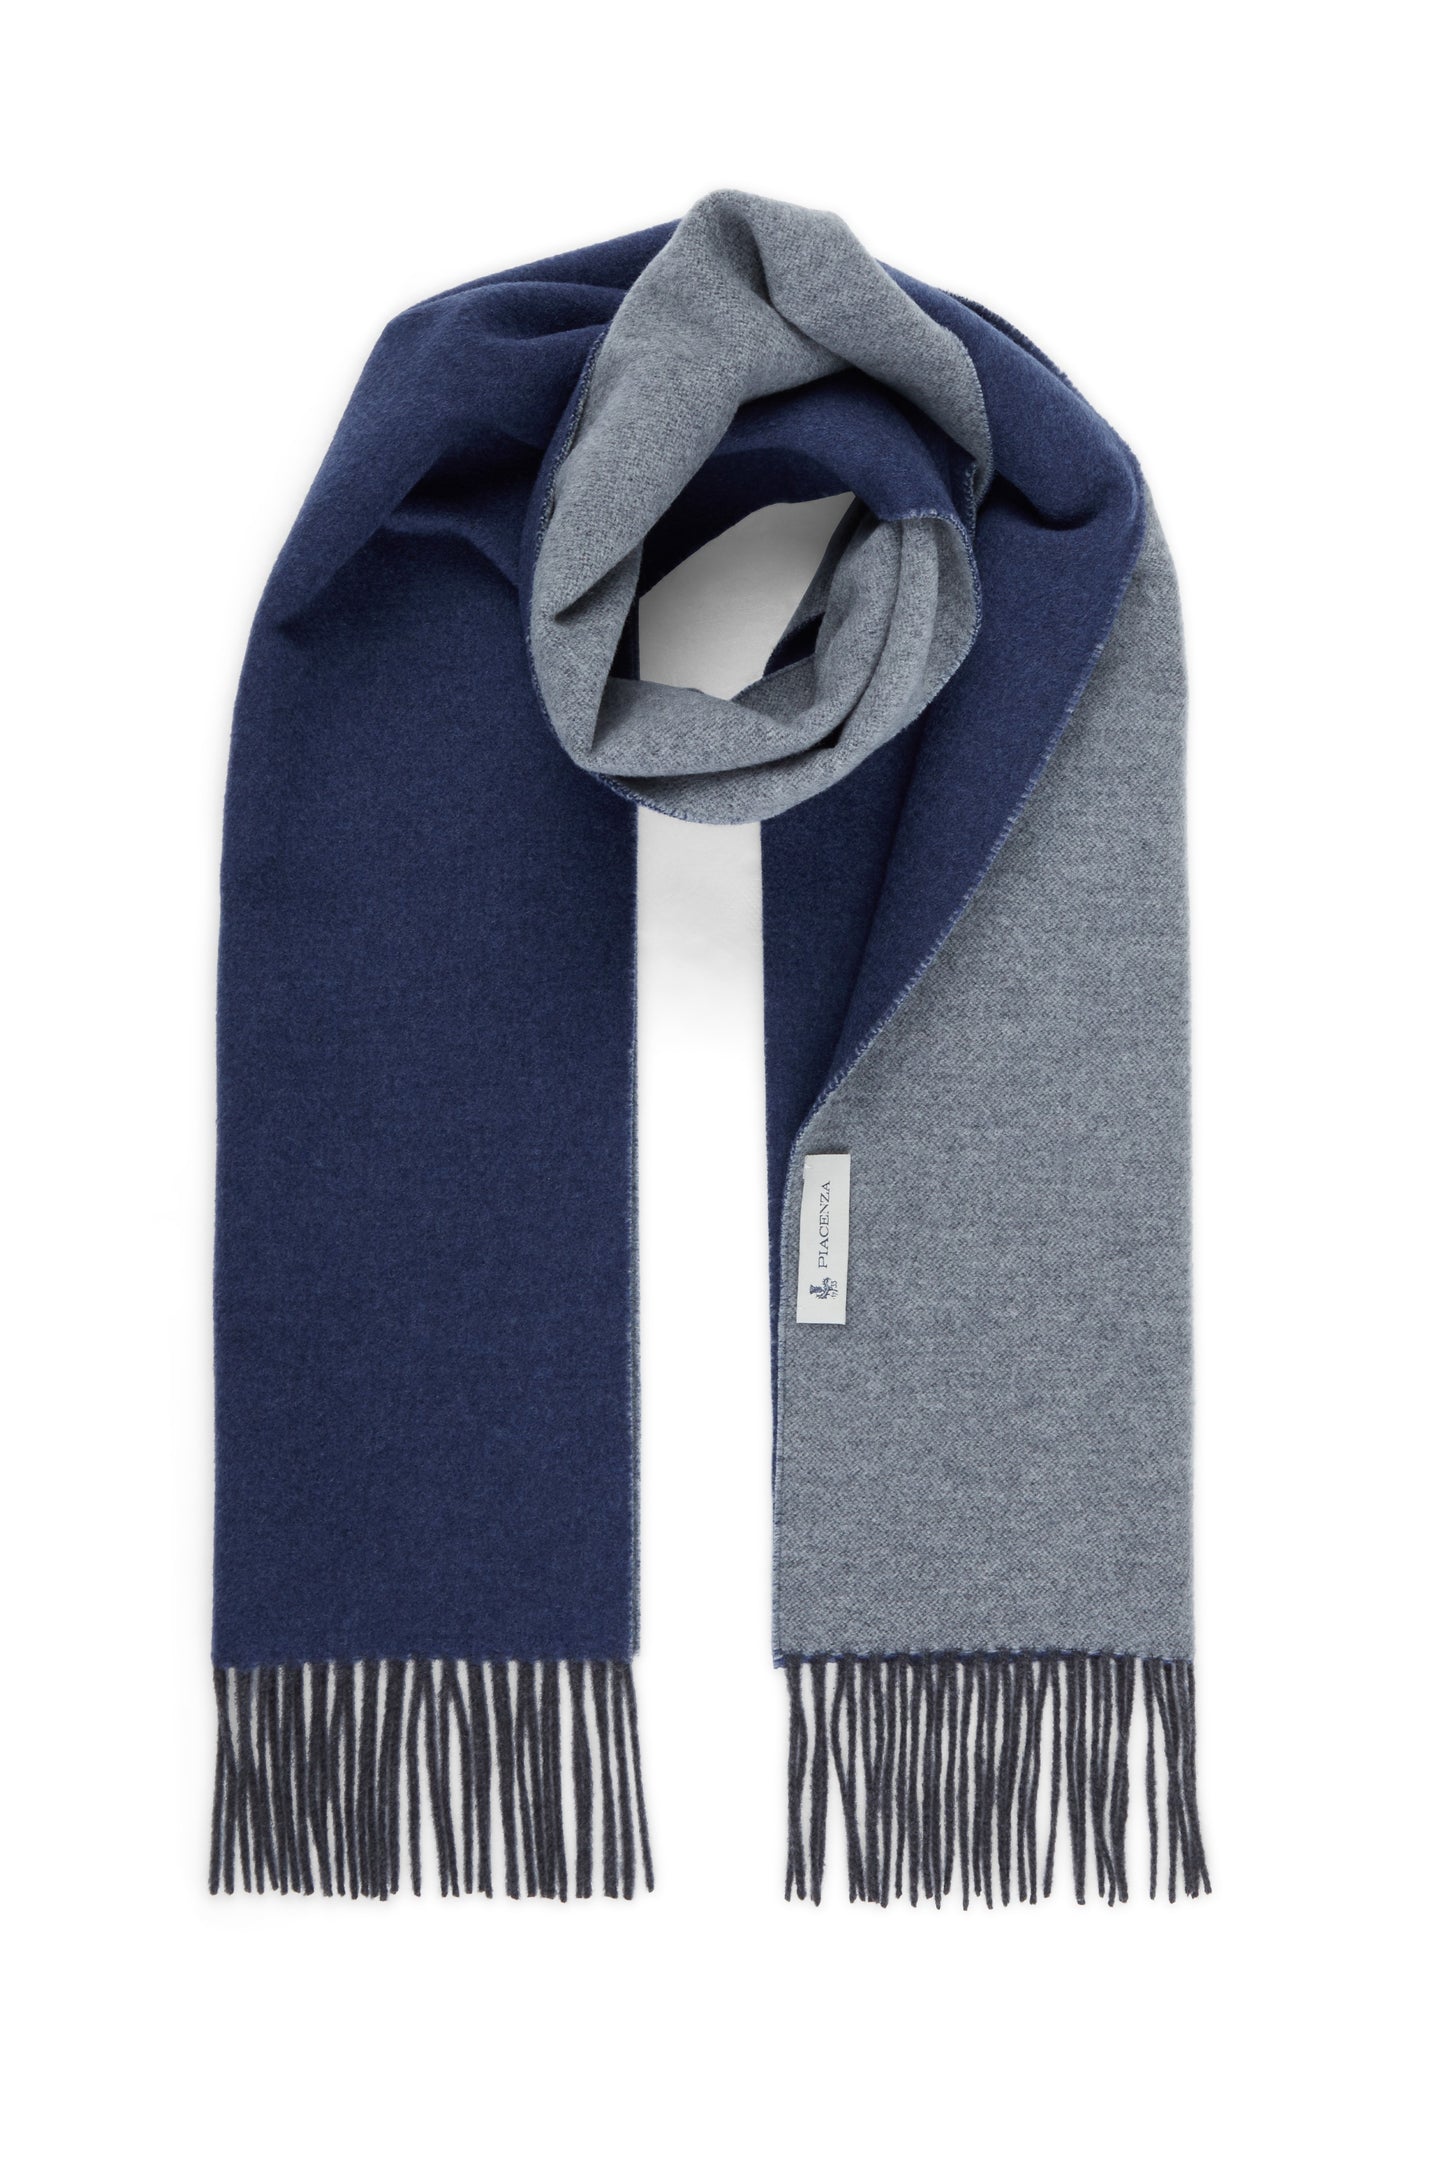 Gray and blue Eternity scarf in pure Alashan Cashmere